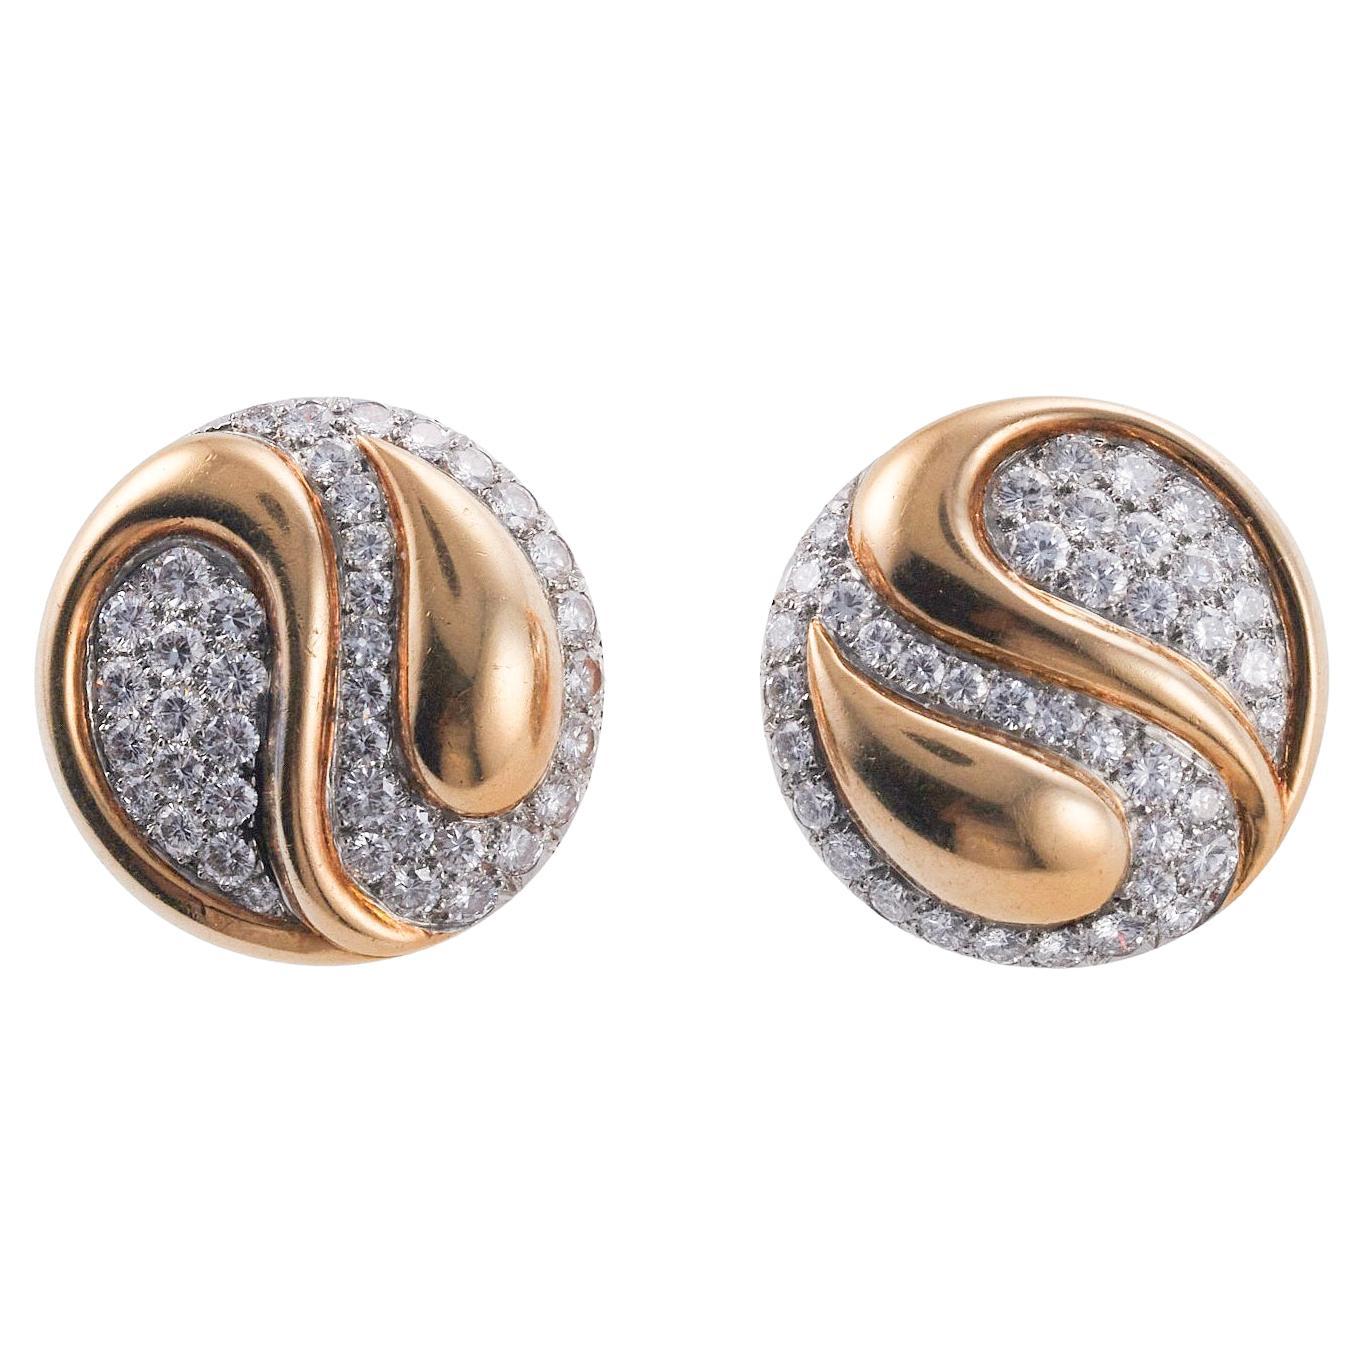 Van Cleef & Arpels France Diamond and Gold Button Earrings